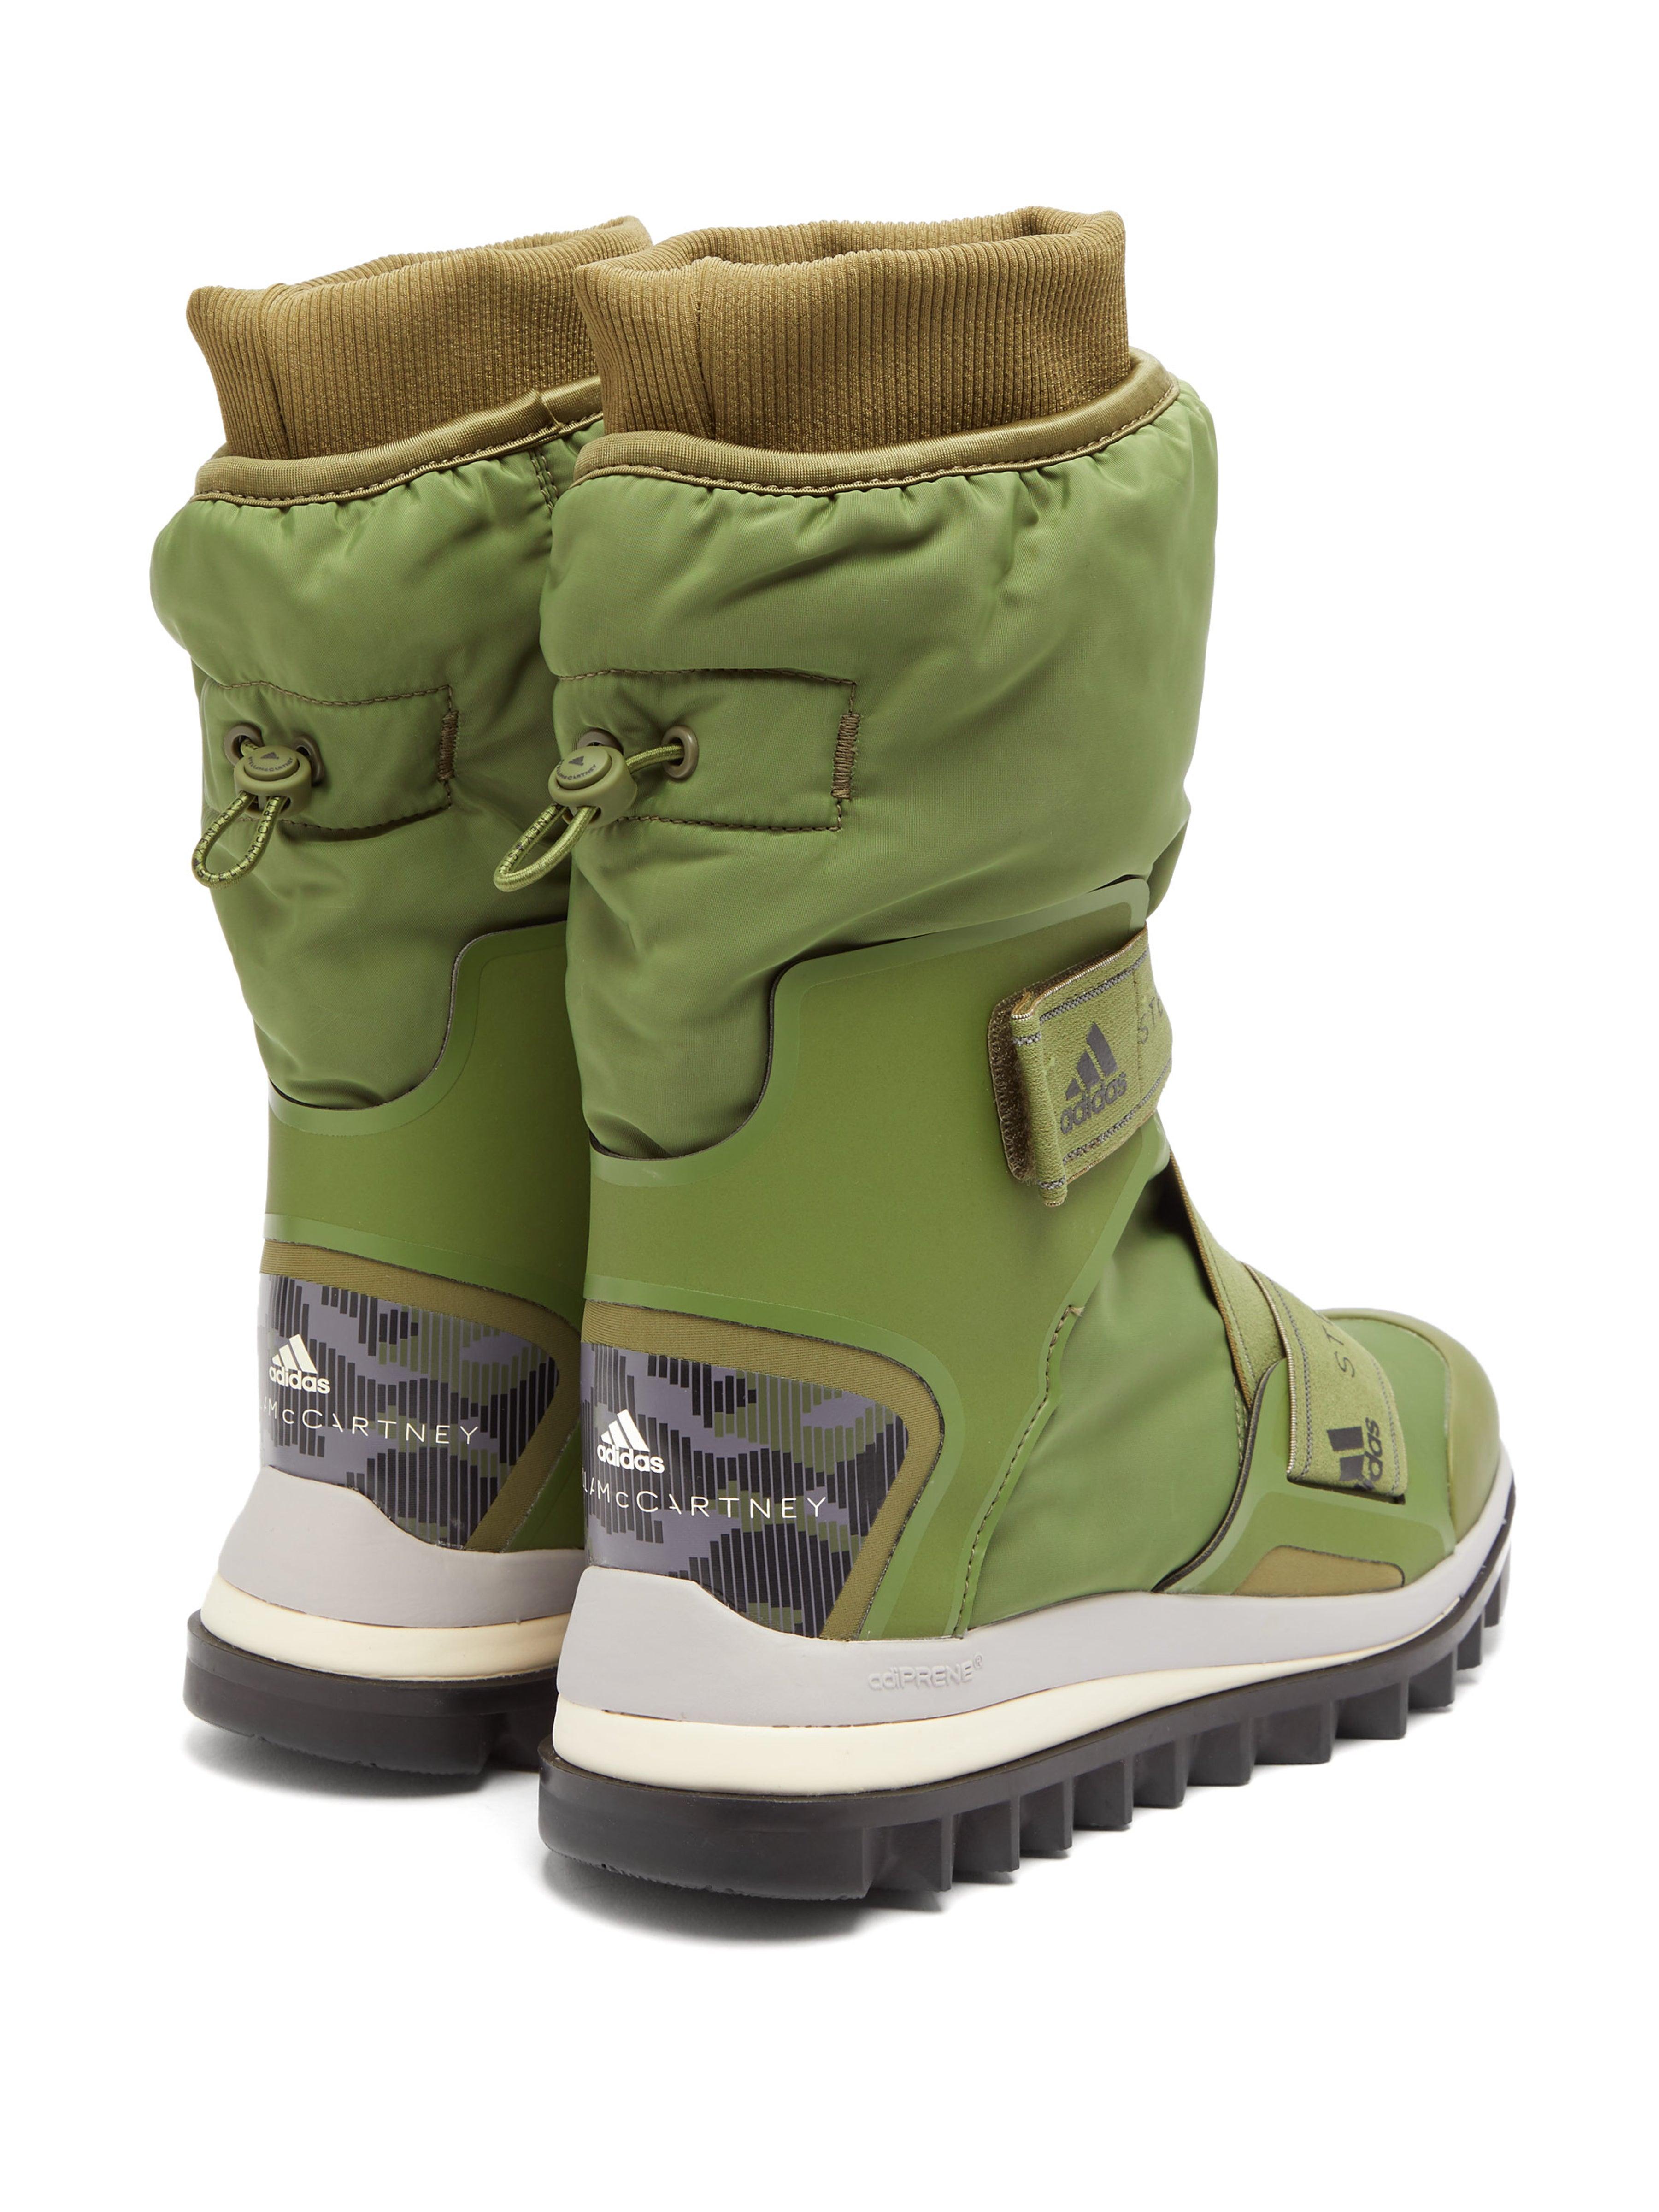 Adidas By Stella Mccartney Synthetic Technical Logo Jacquard Boots In Khaki Green Lyst